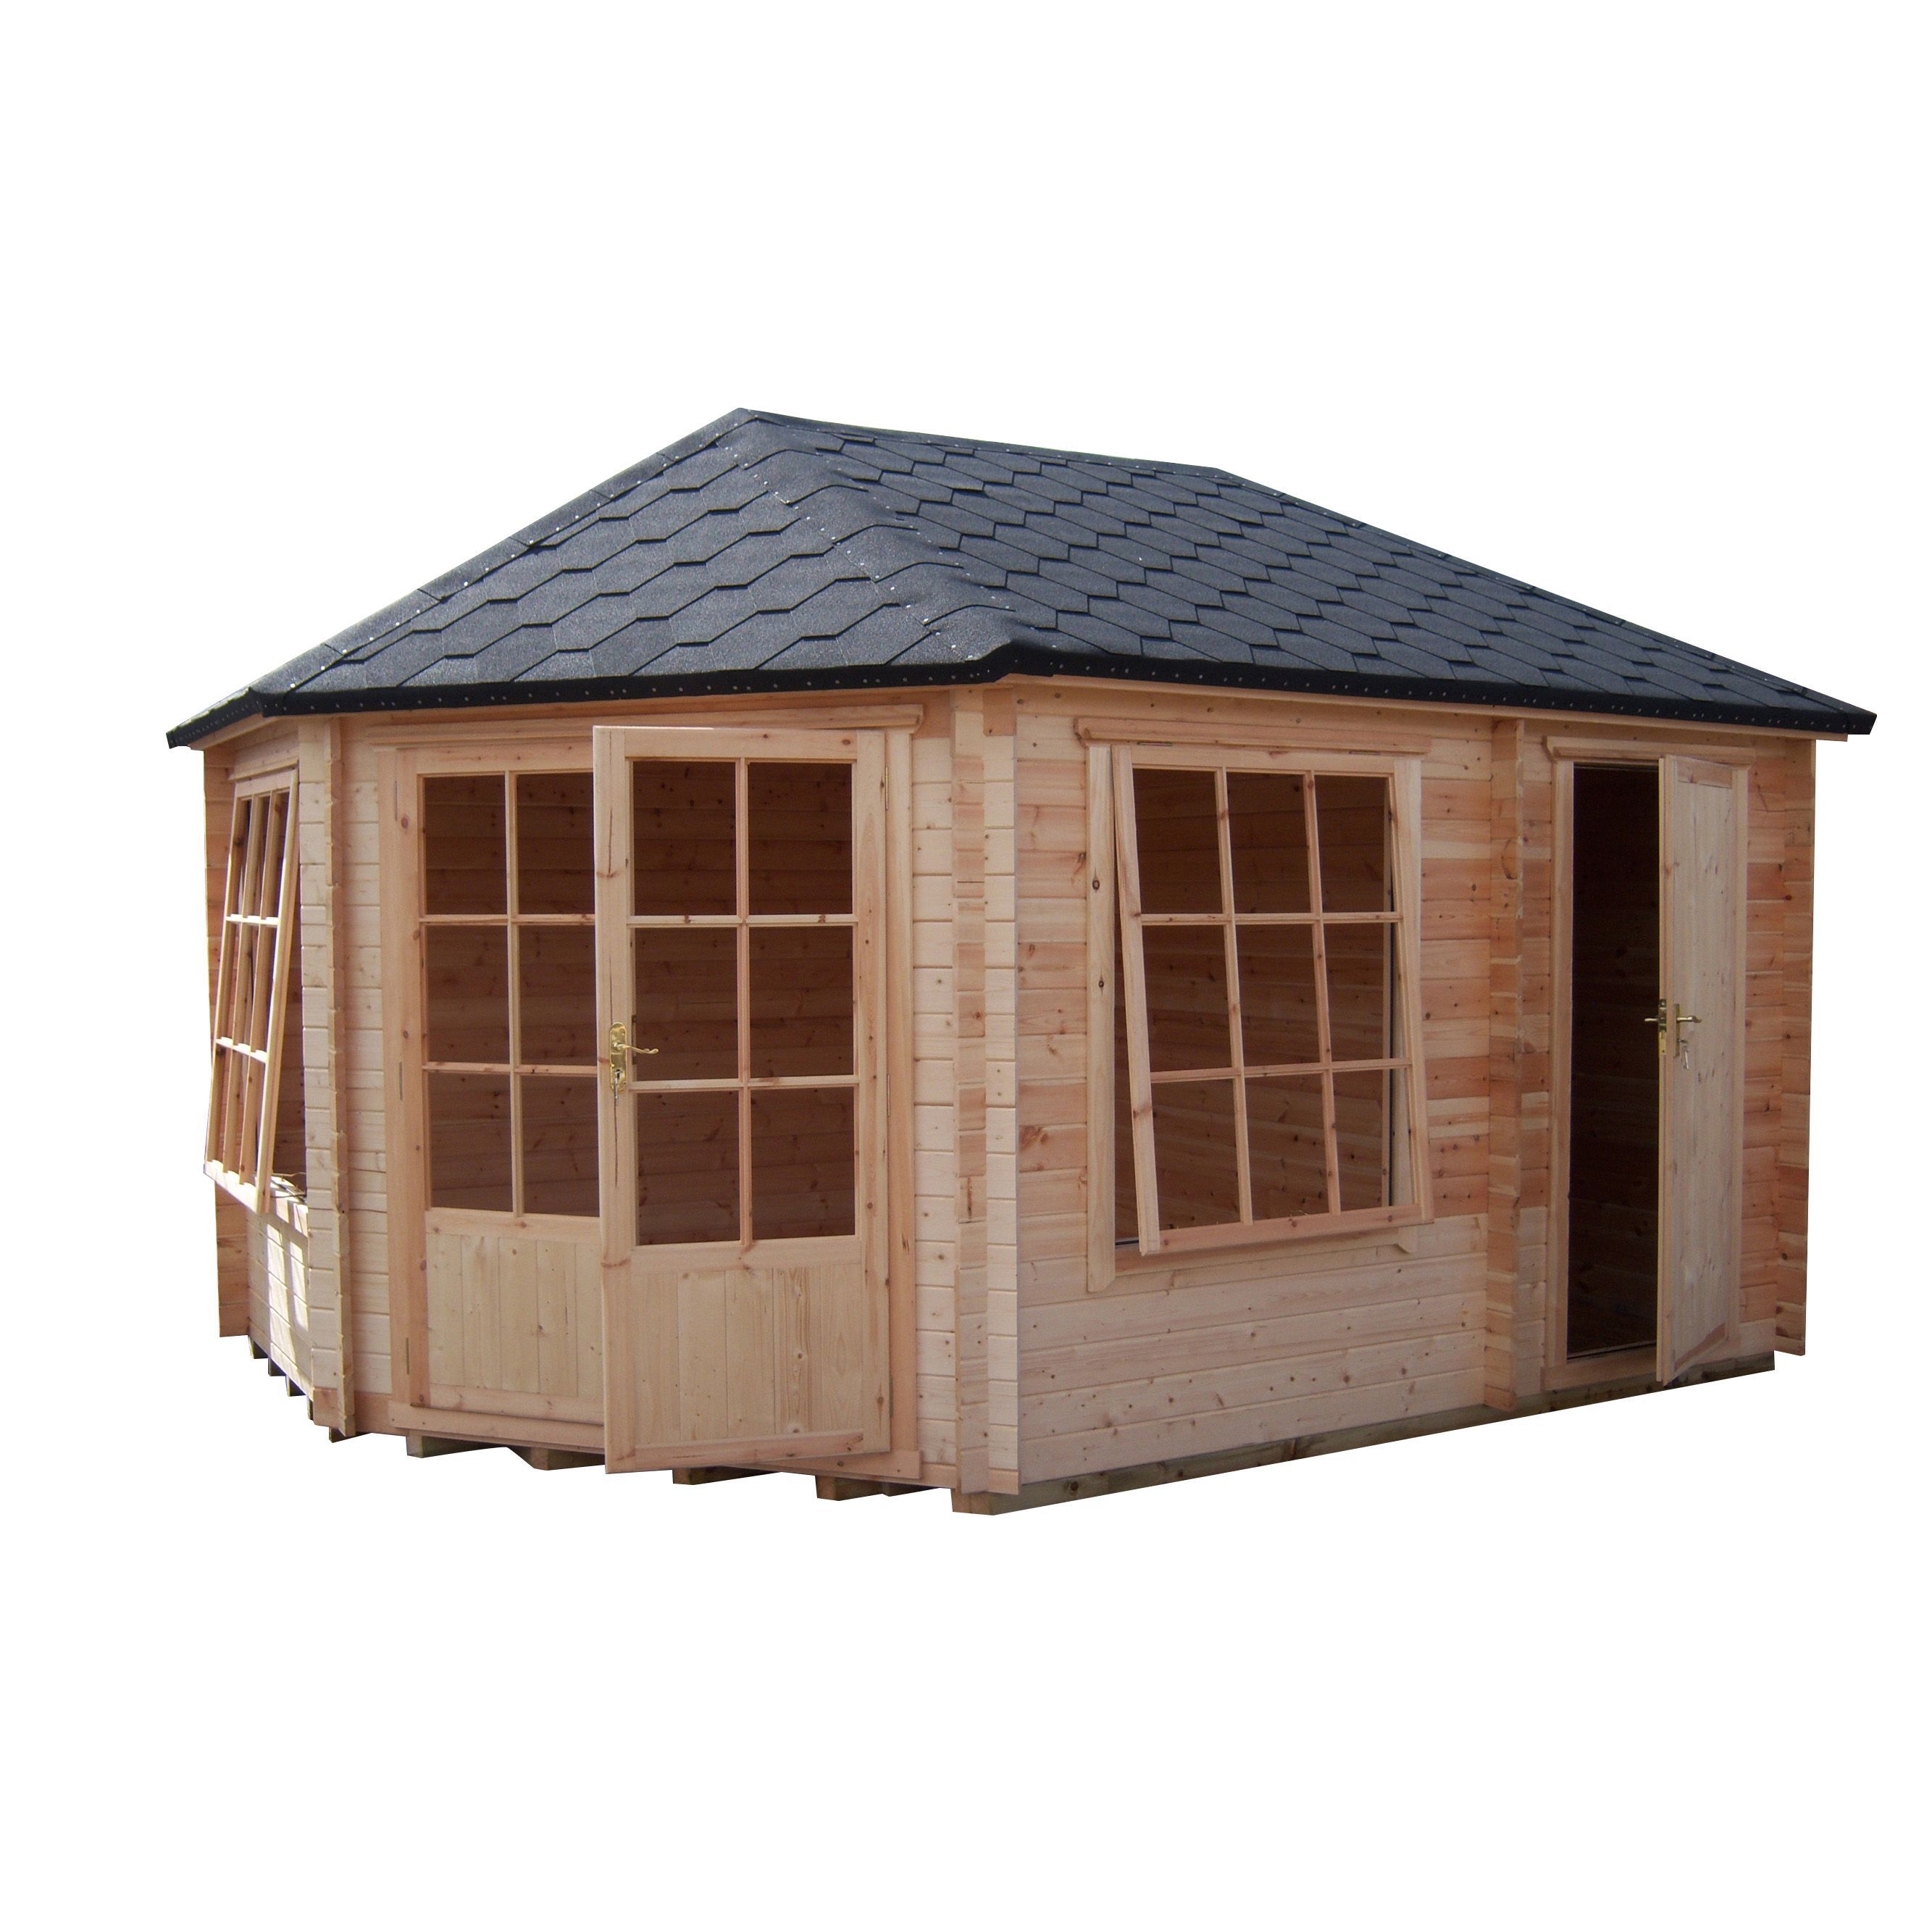 Shire Rowney 14x10 Apex Tongue & groove Wooden Cabin